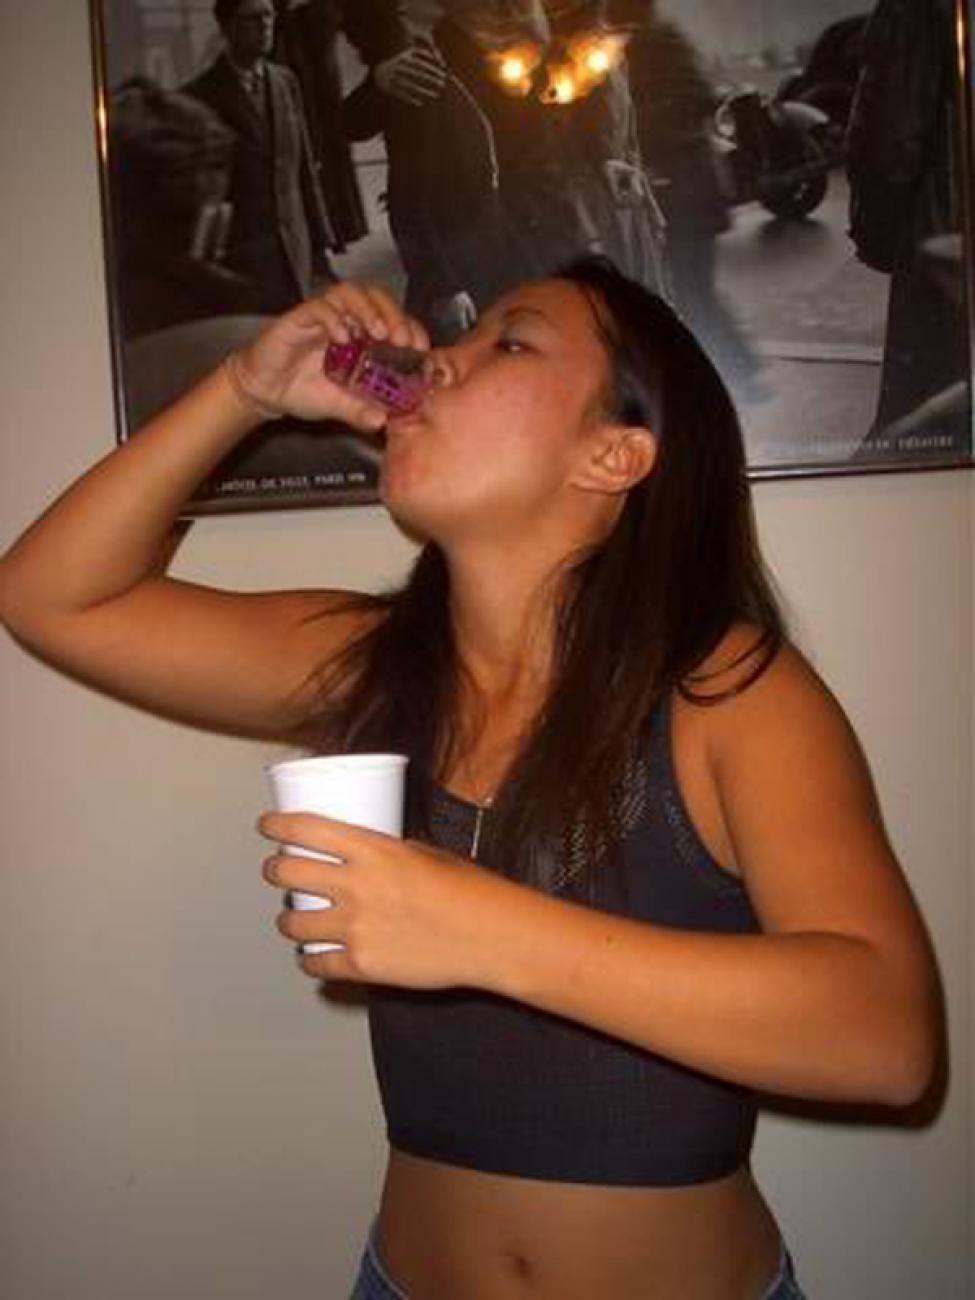 Pictures of an Asian GF who got trashed in her birthday bash #77129877